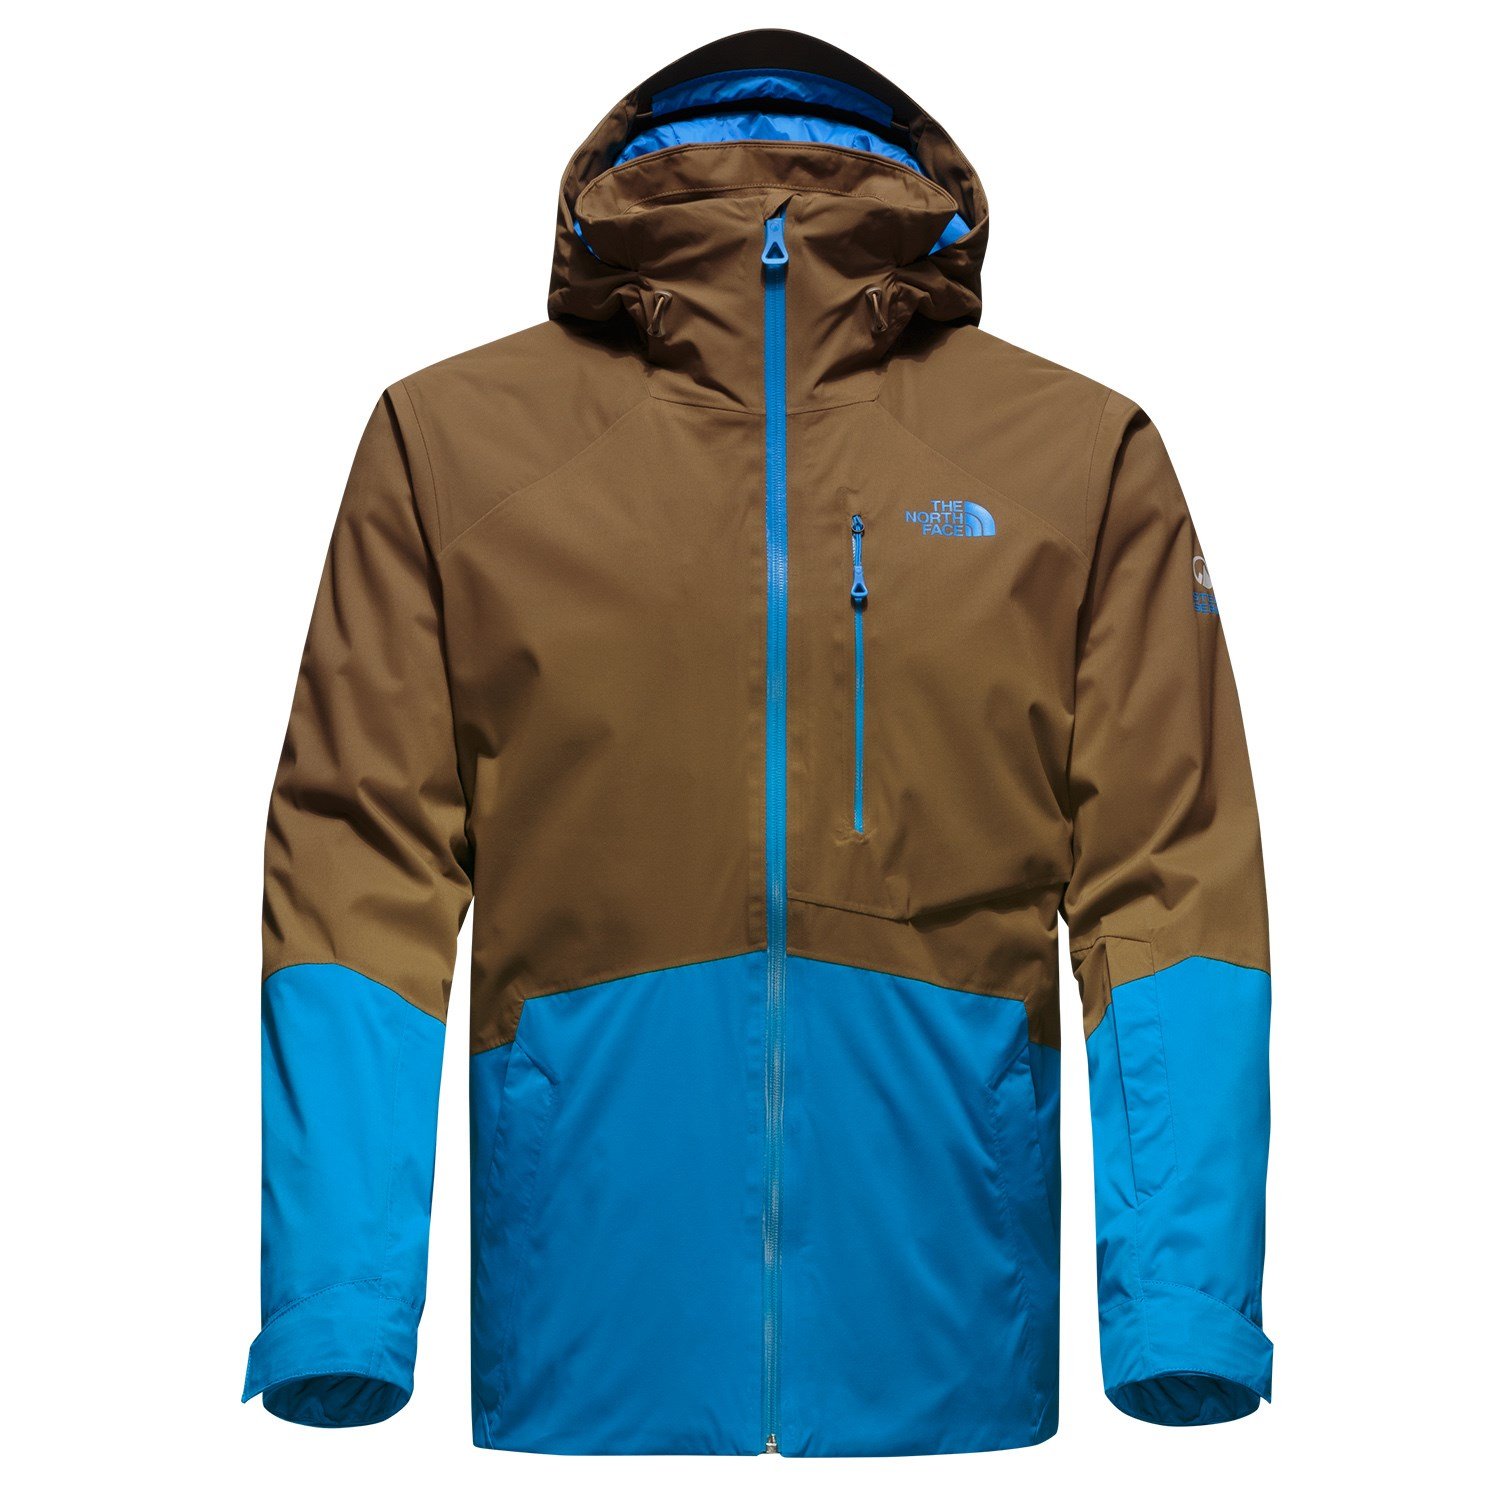 the north face men's snowboard jacket